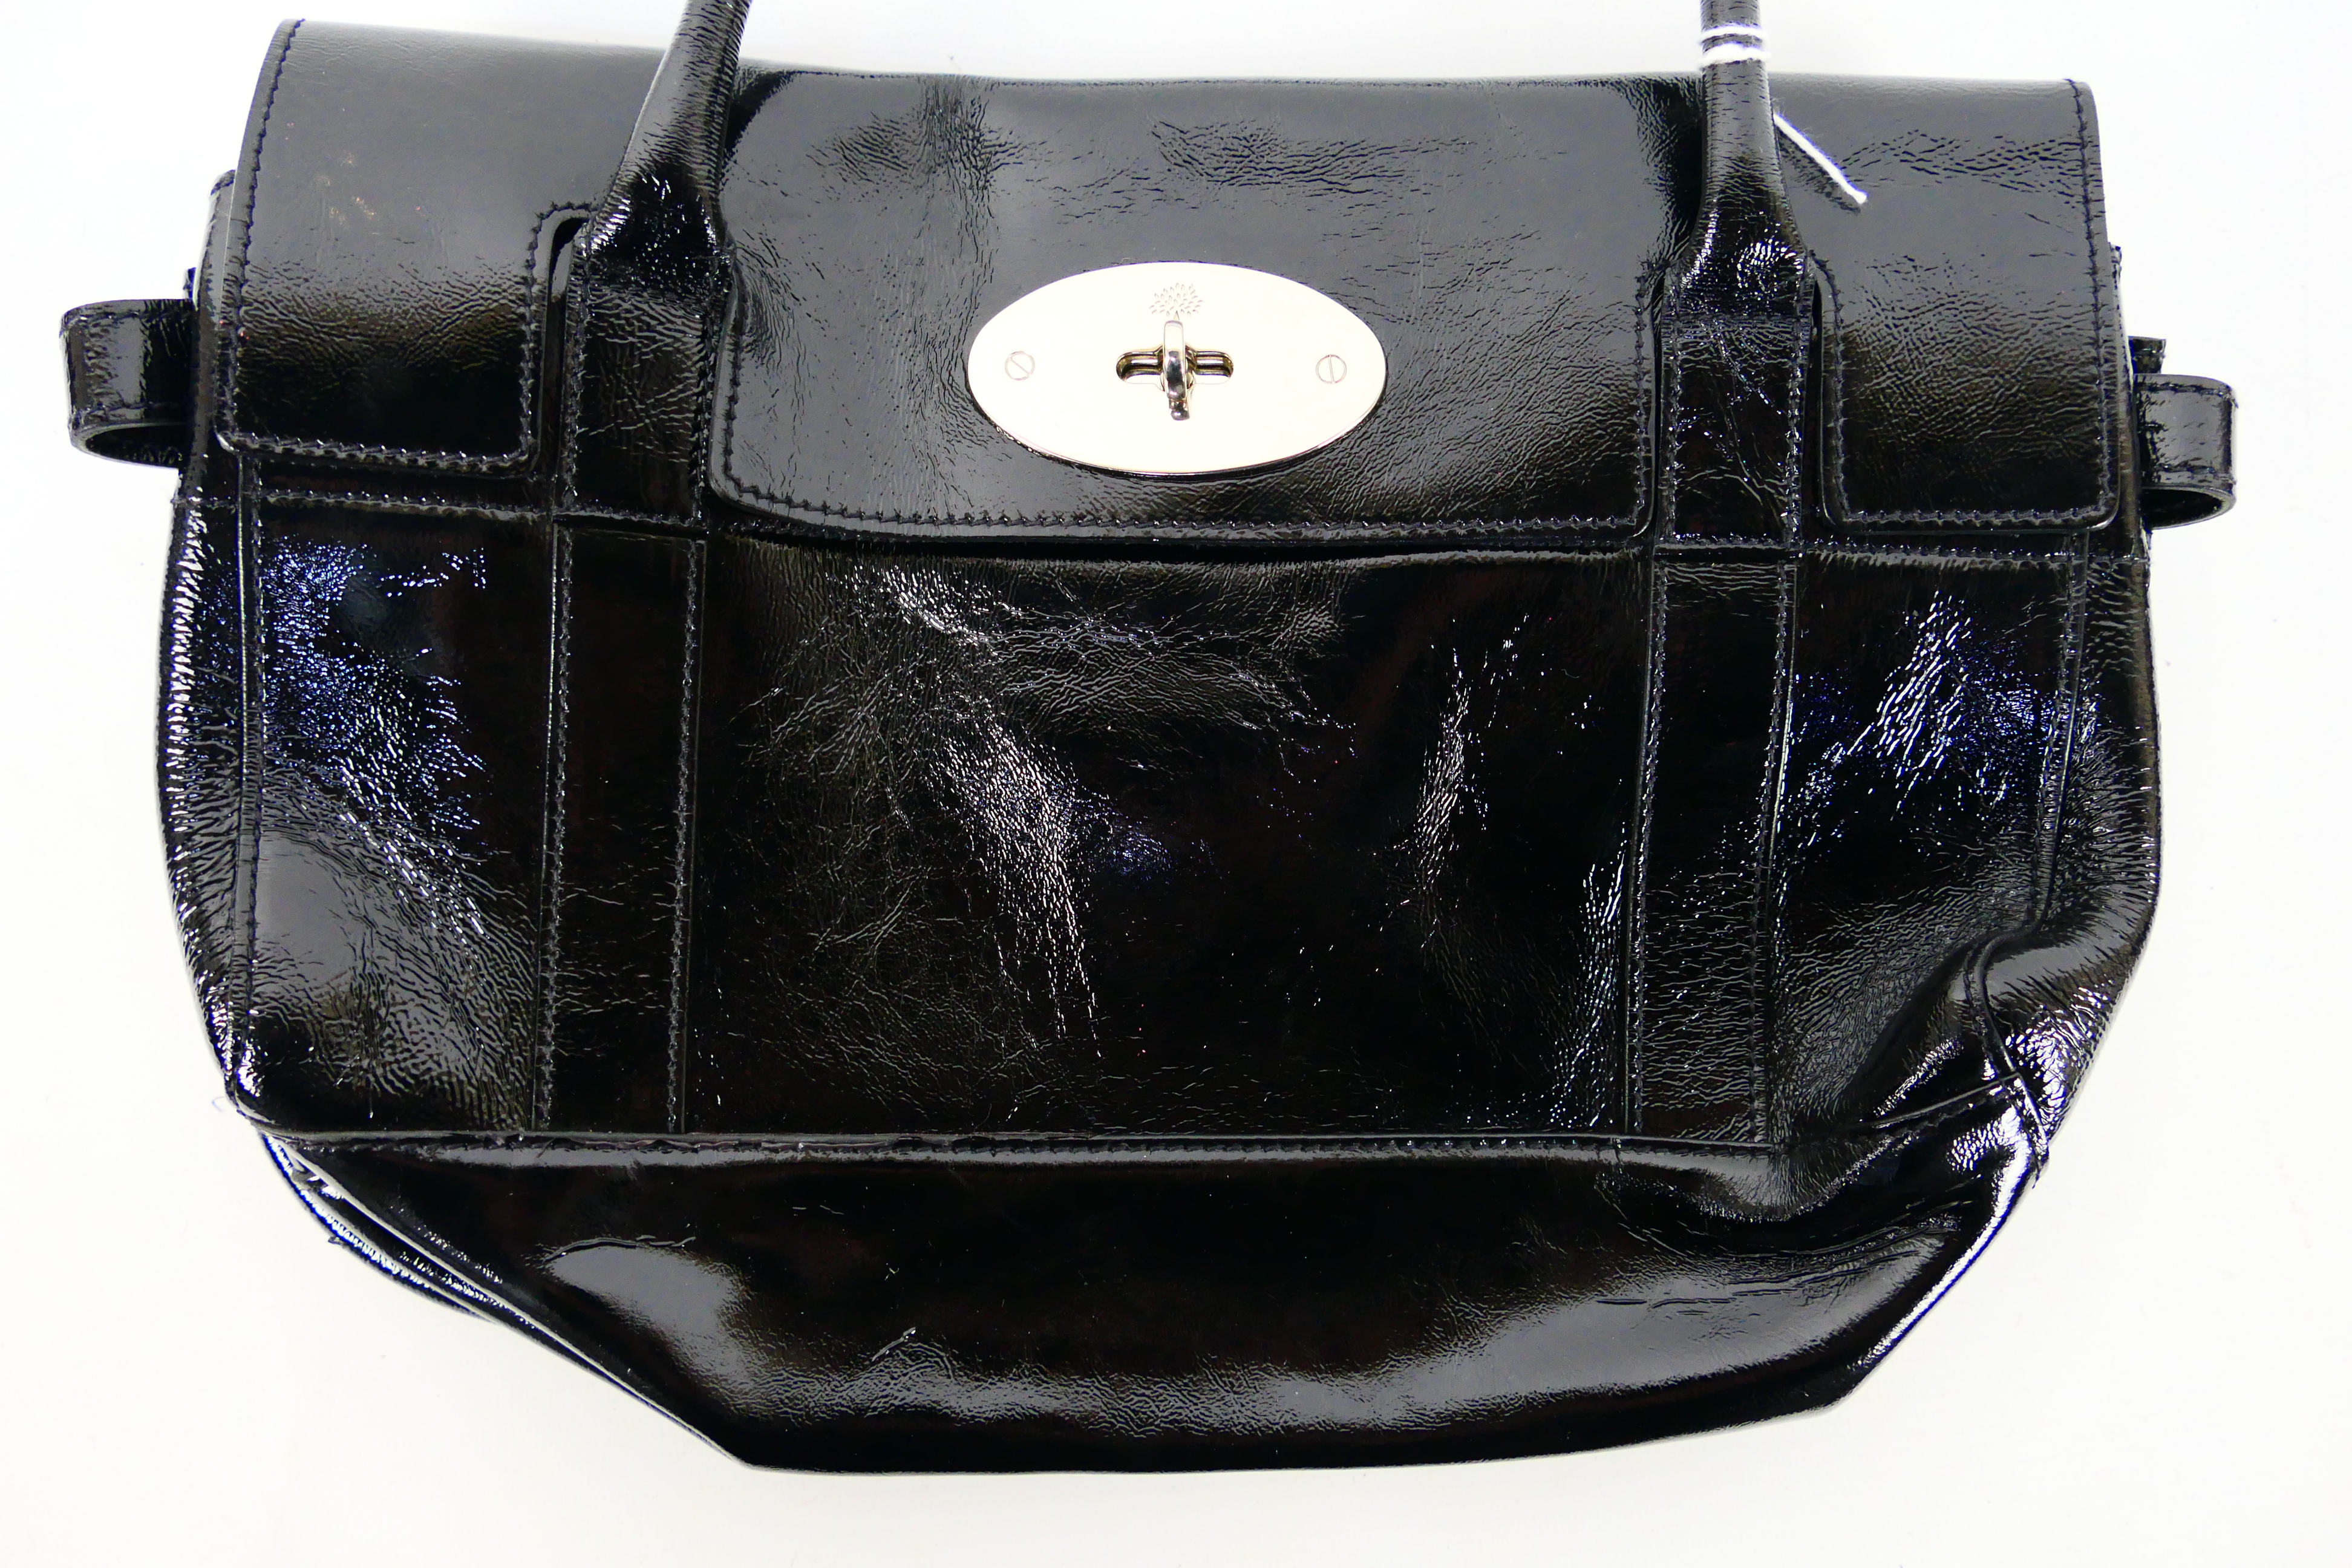 Mulberry - a black patent leather Mulberry handbag, labelled with markers, - Image 3 of 7